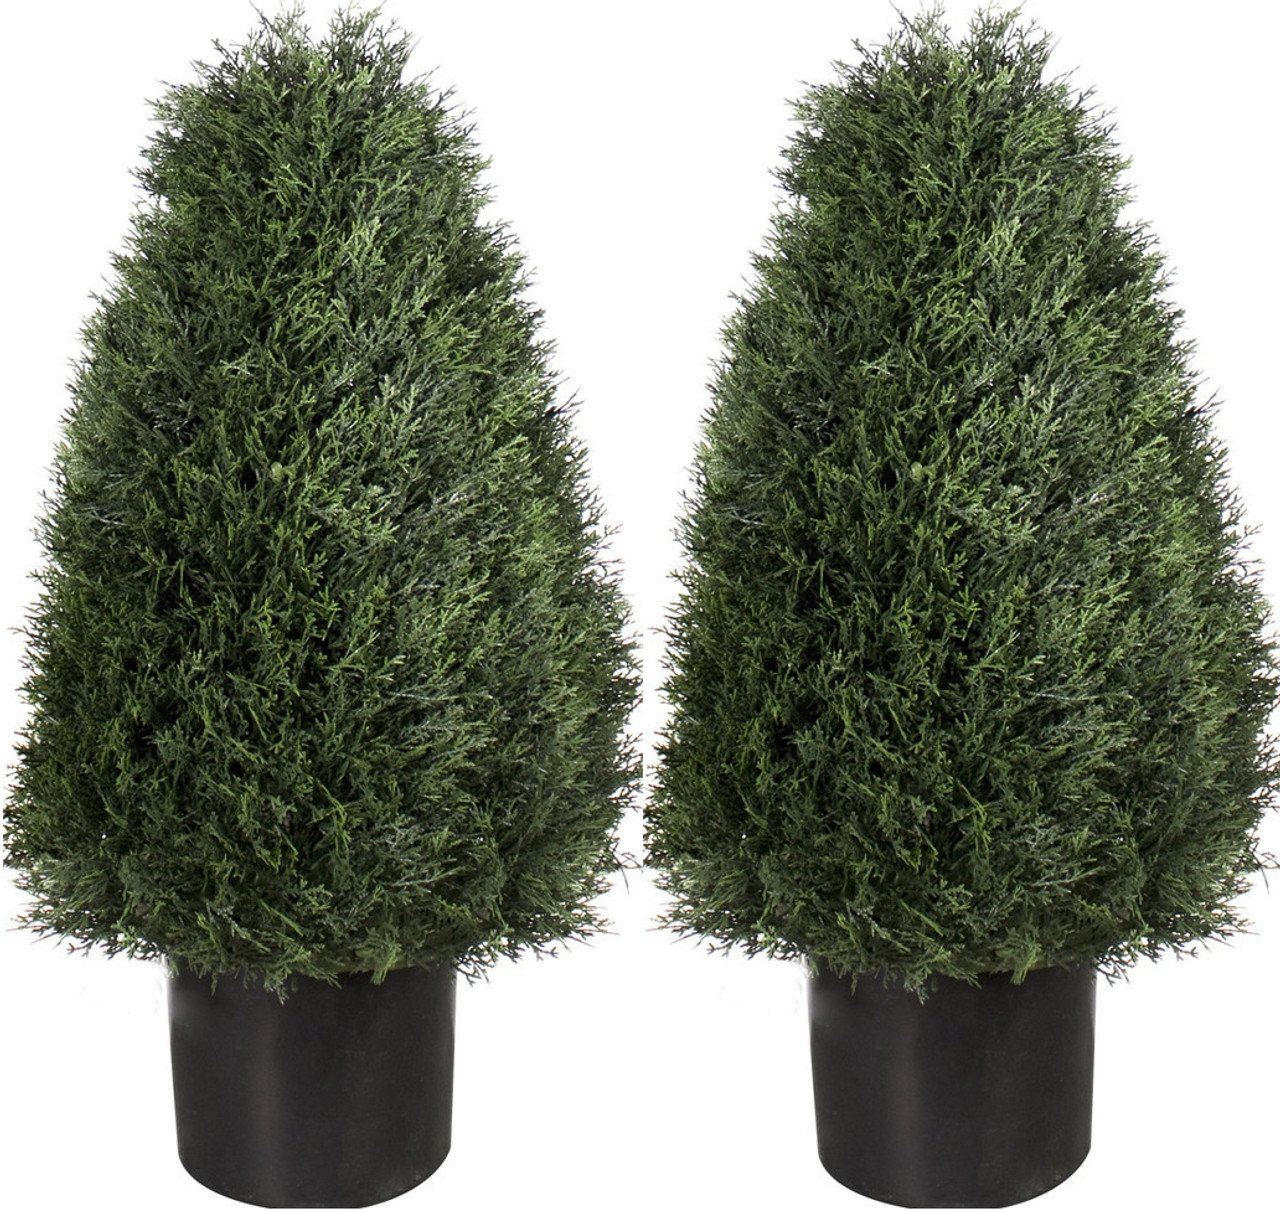 Silk Tree Warehouse Two 6 Foot Outdoor Artificial Cedar Spiral Topiary Trees Potted UV Rated Plants